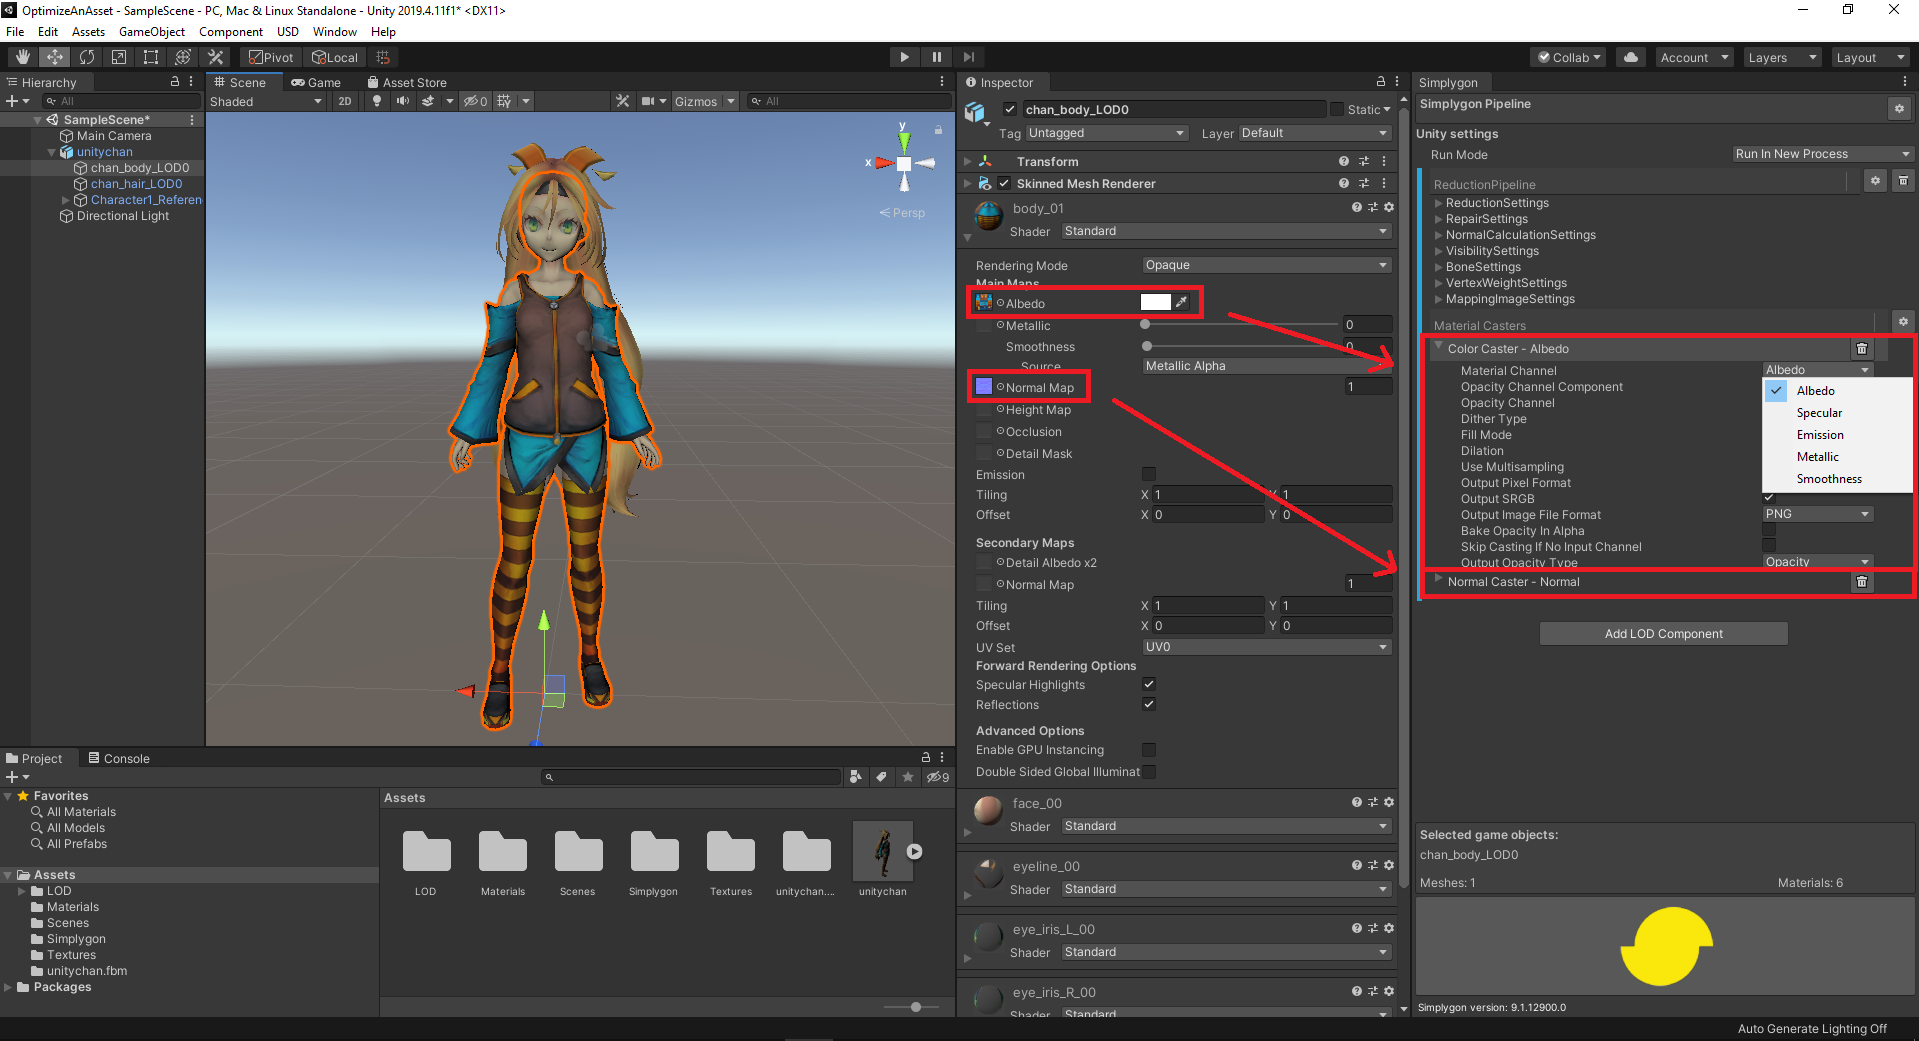 Unity channel mapping